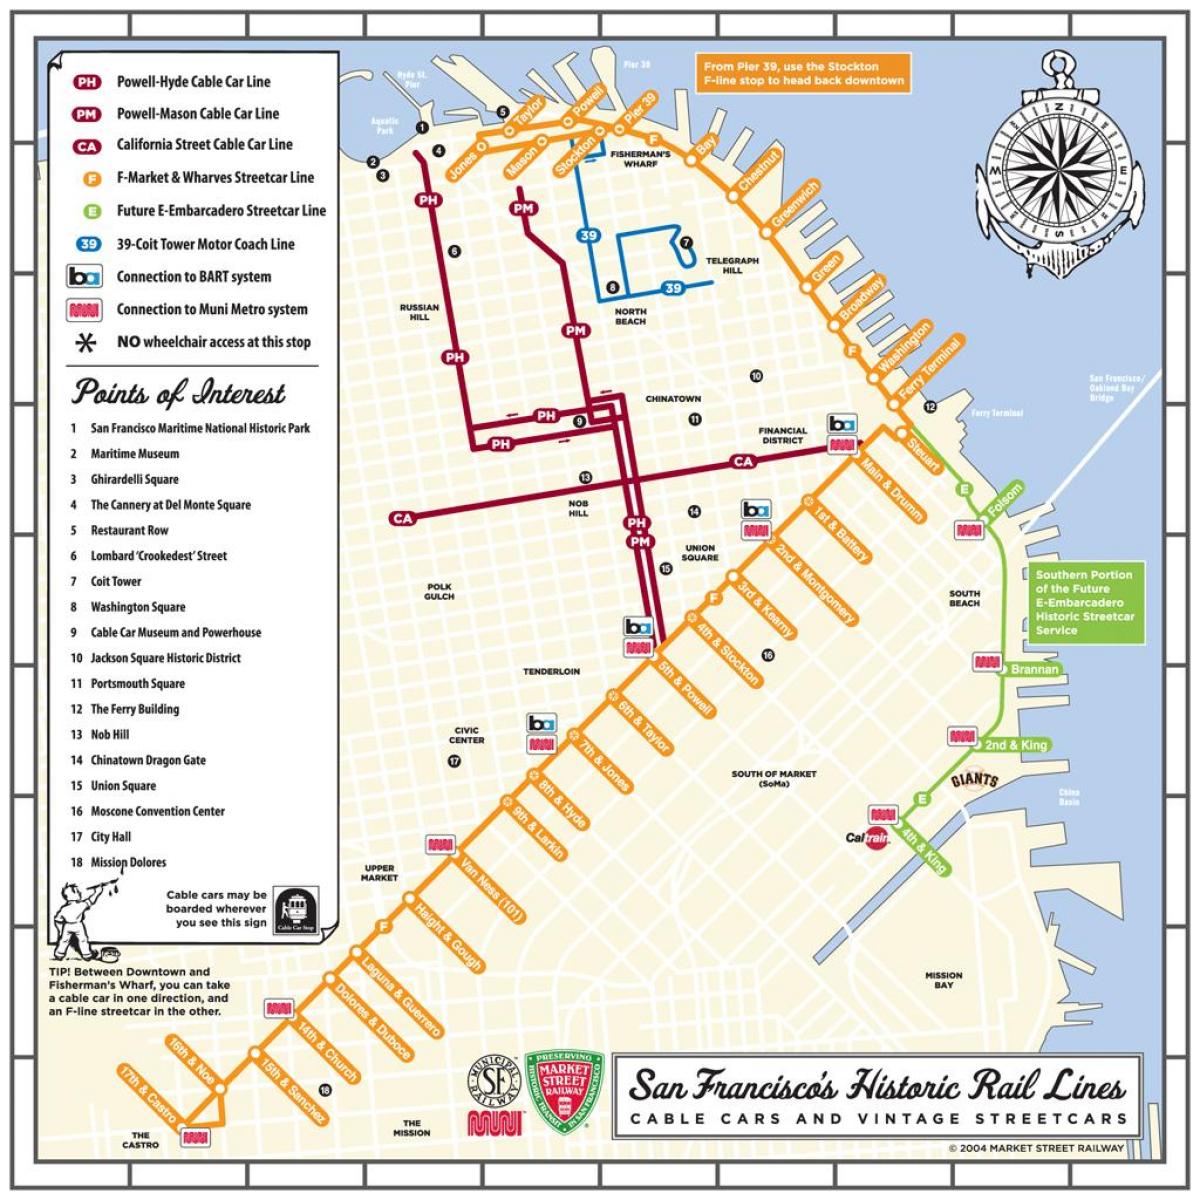 San Francisco cable car route map - Cable car route map (California - USA)